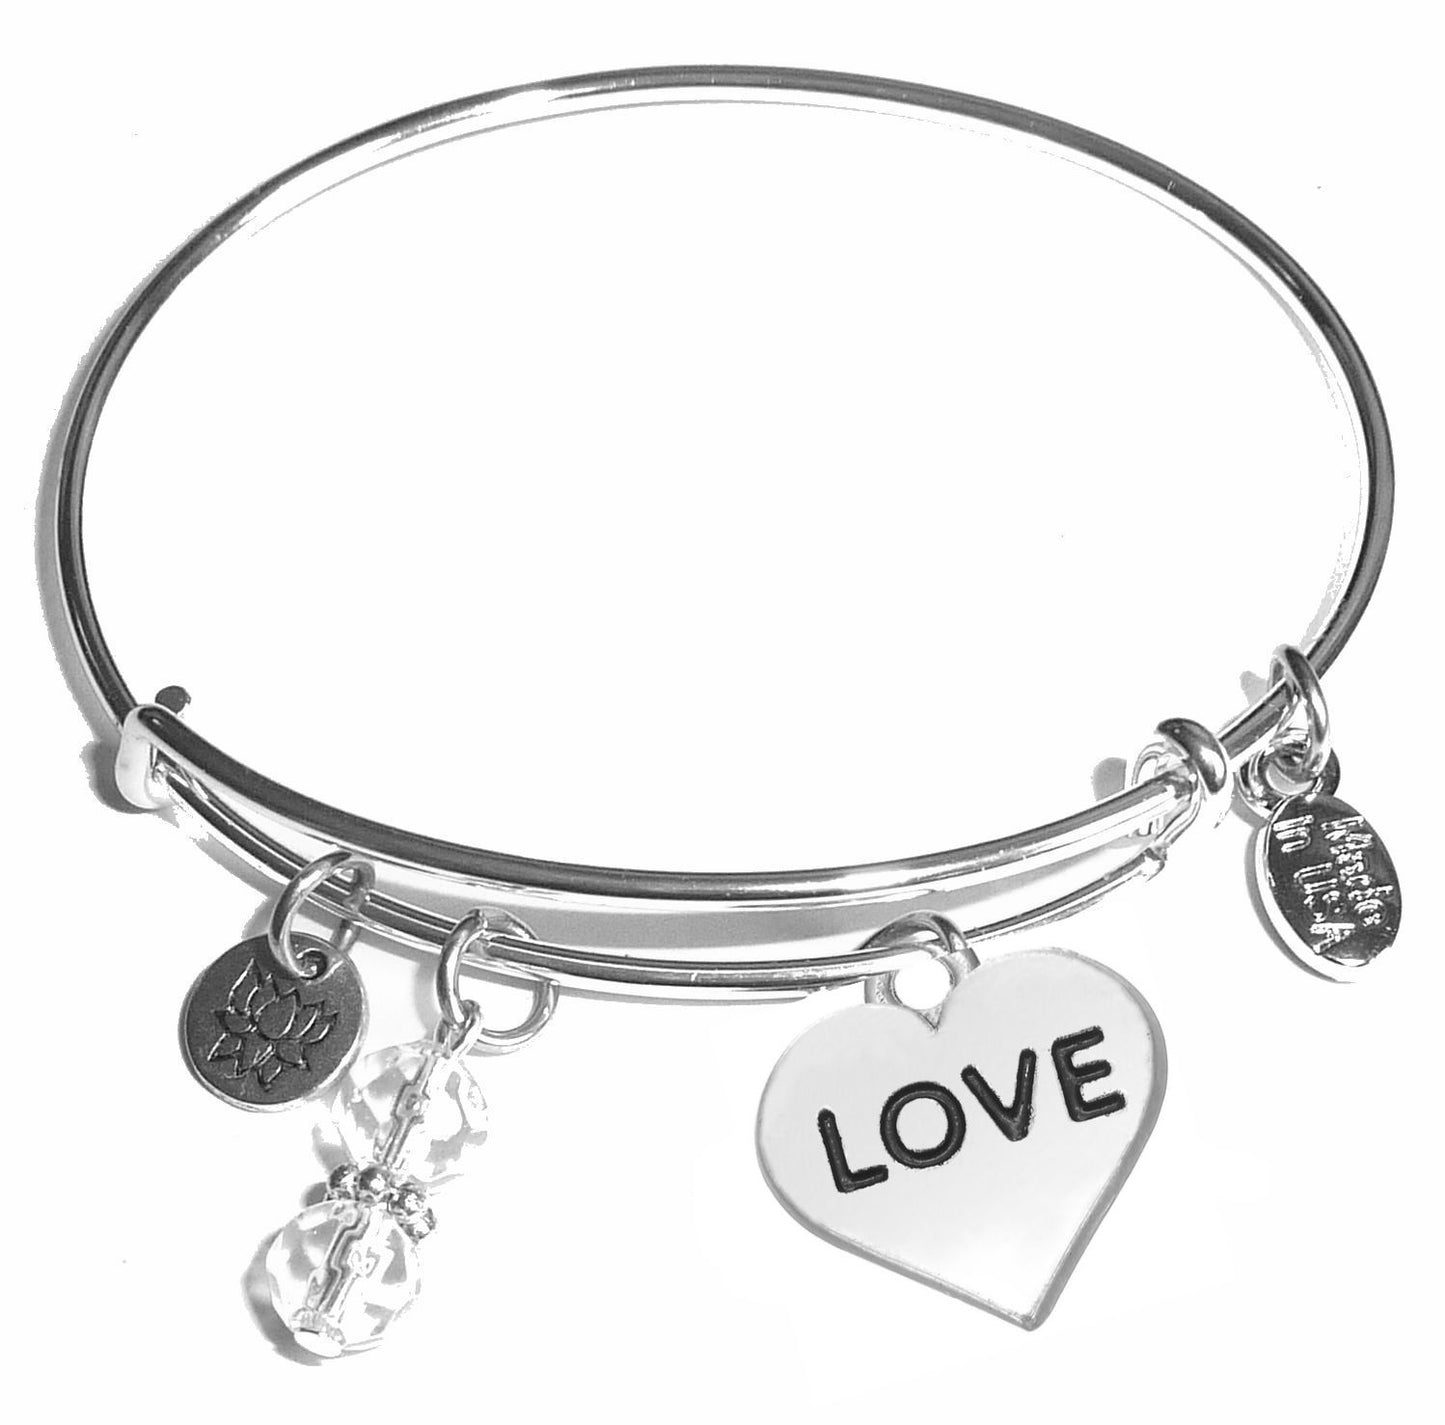 Love - Message Bangle Bracelet - Expandable Wire Bracelet– Comes in a gift box